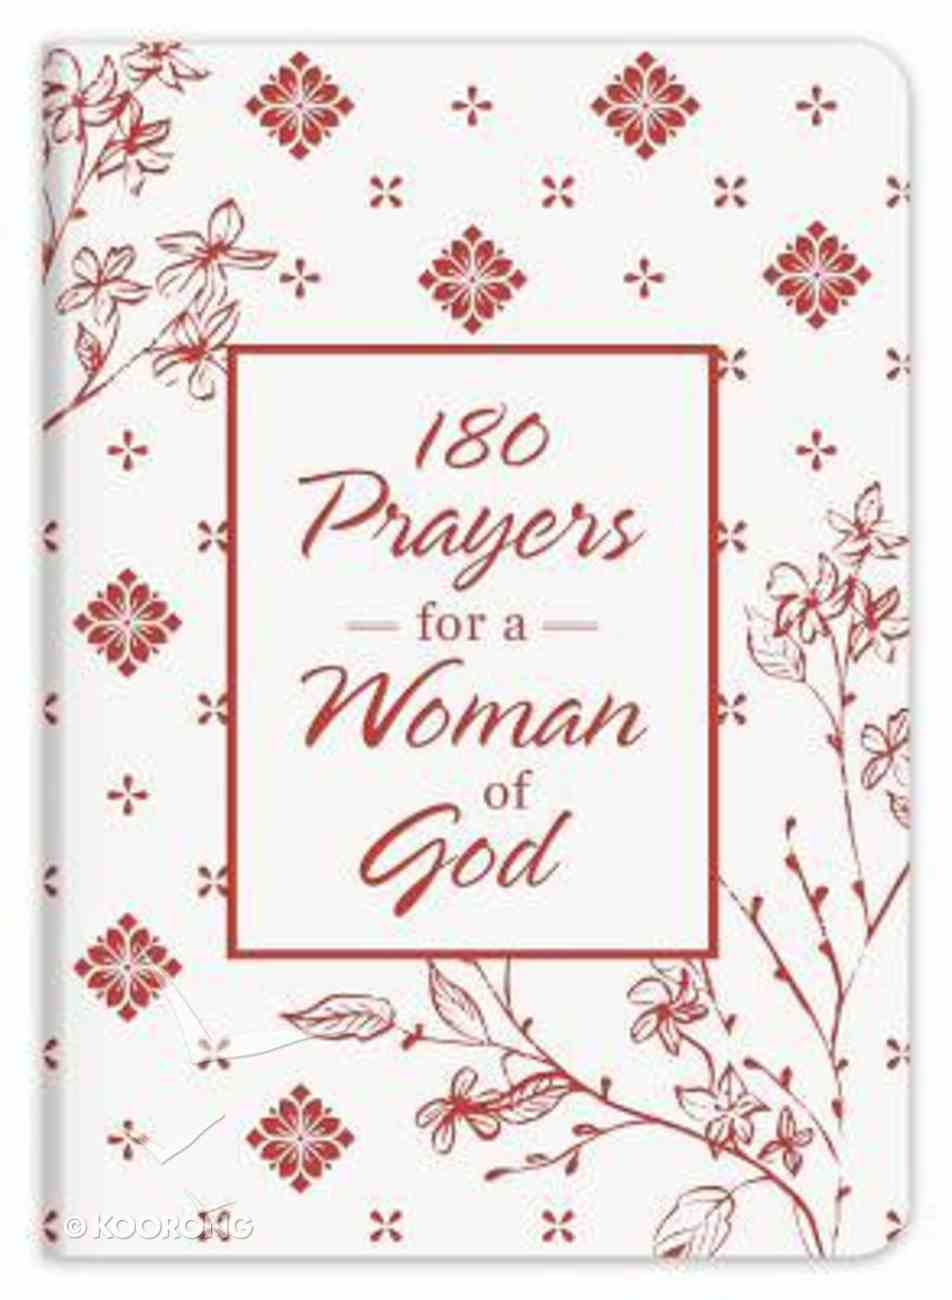 180 Prayers For a Woman of God Paperback